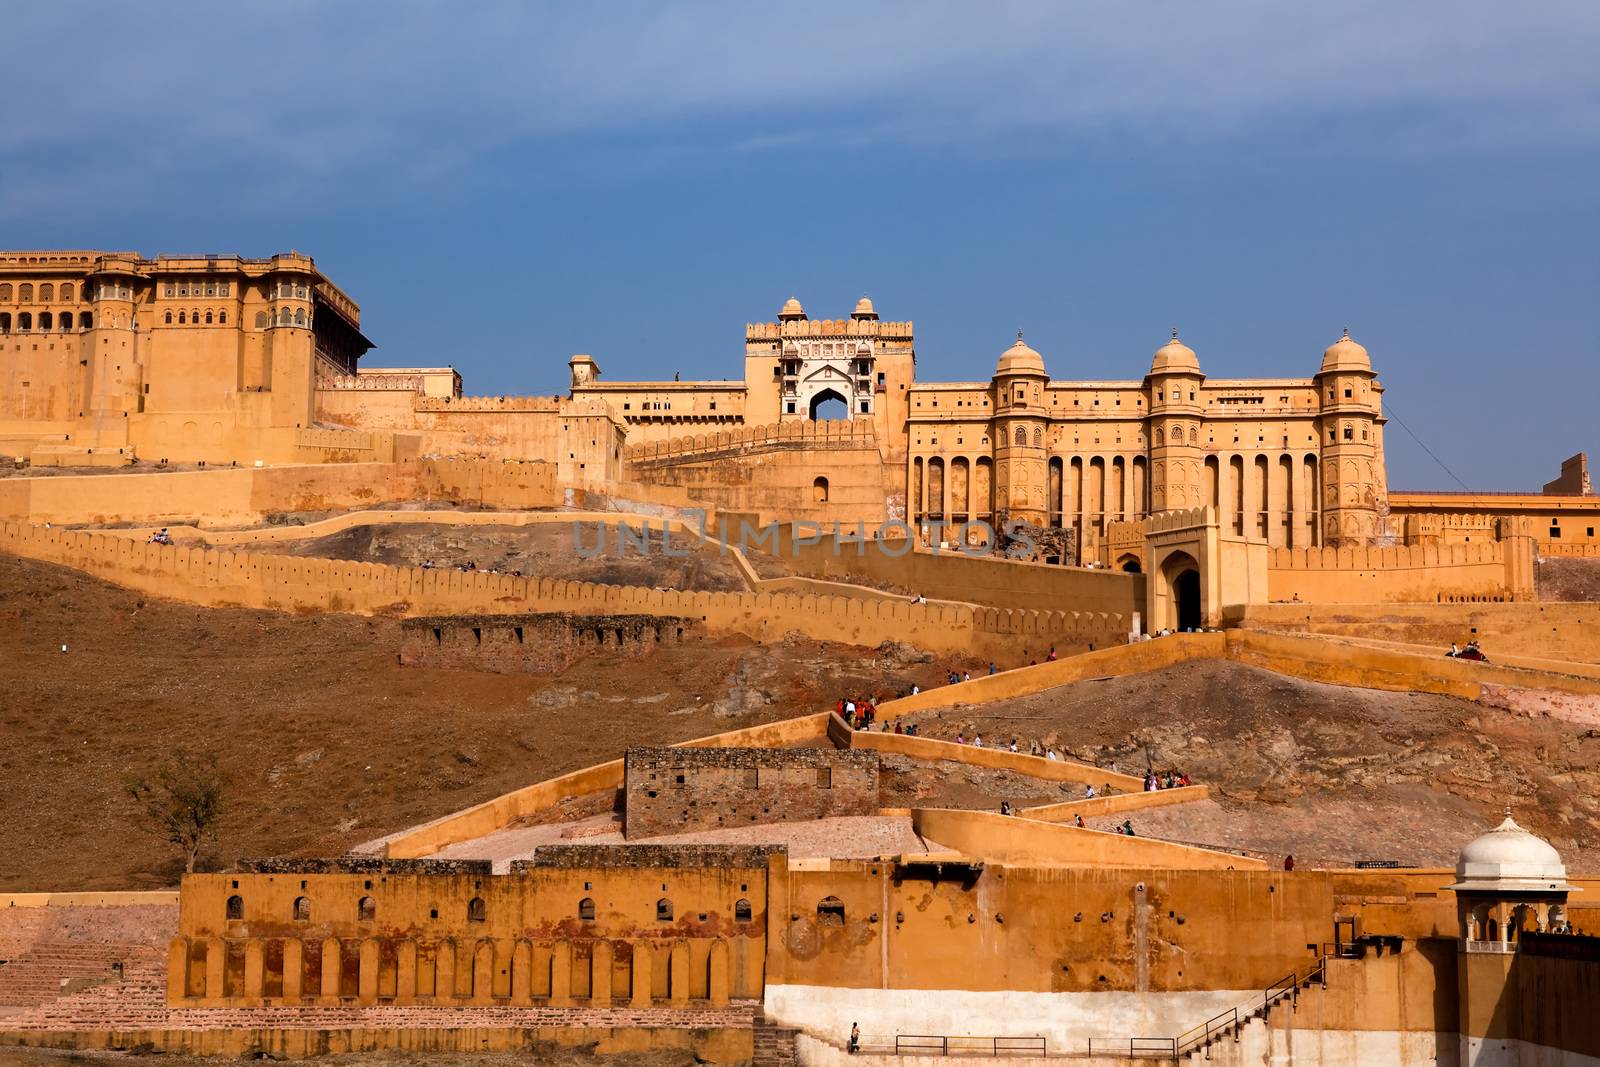 Amber Fort in jaipur in rajasthan state in india